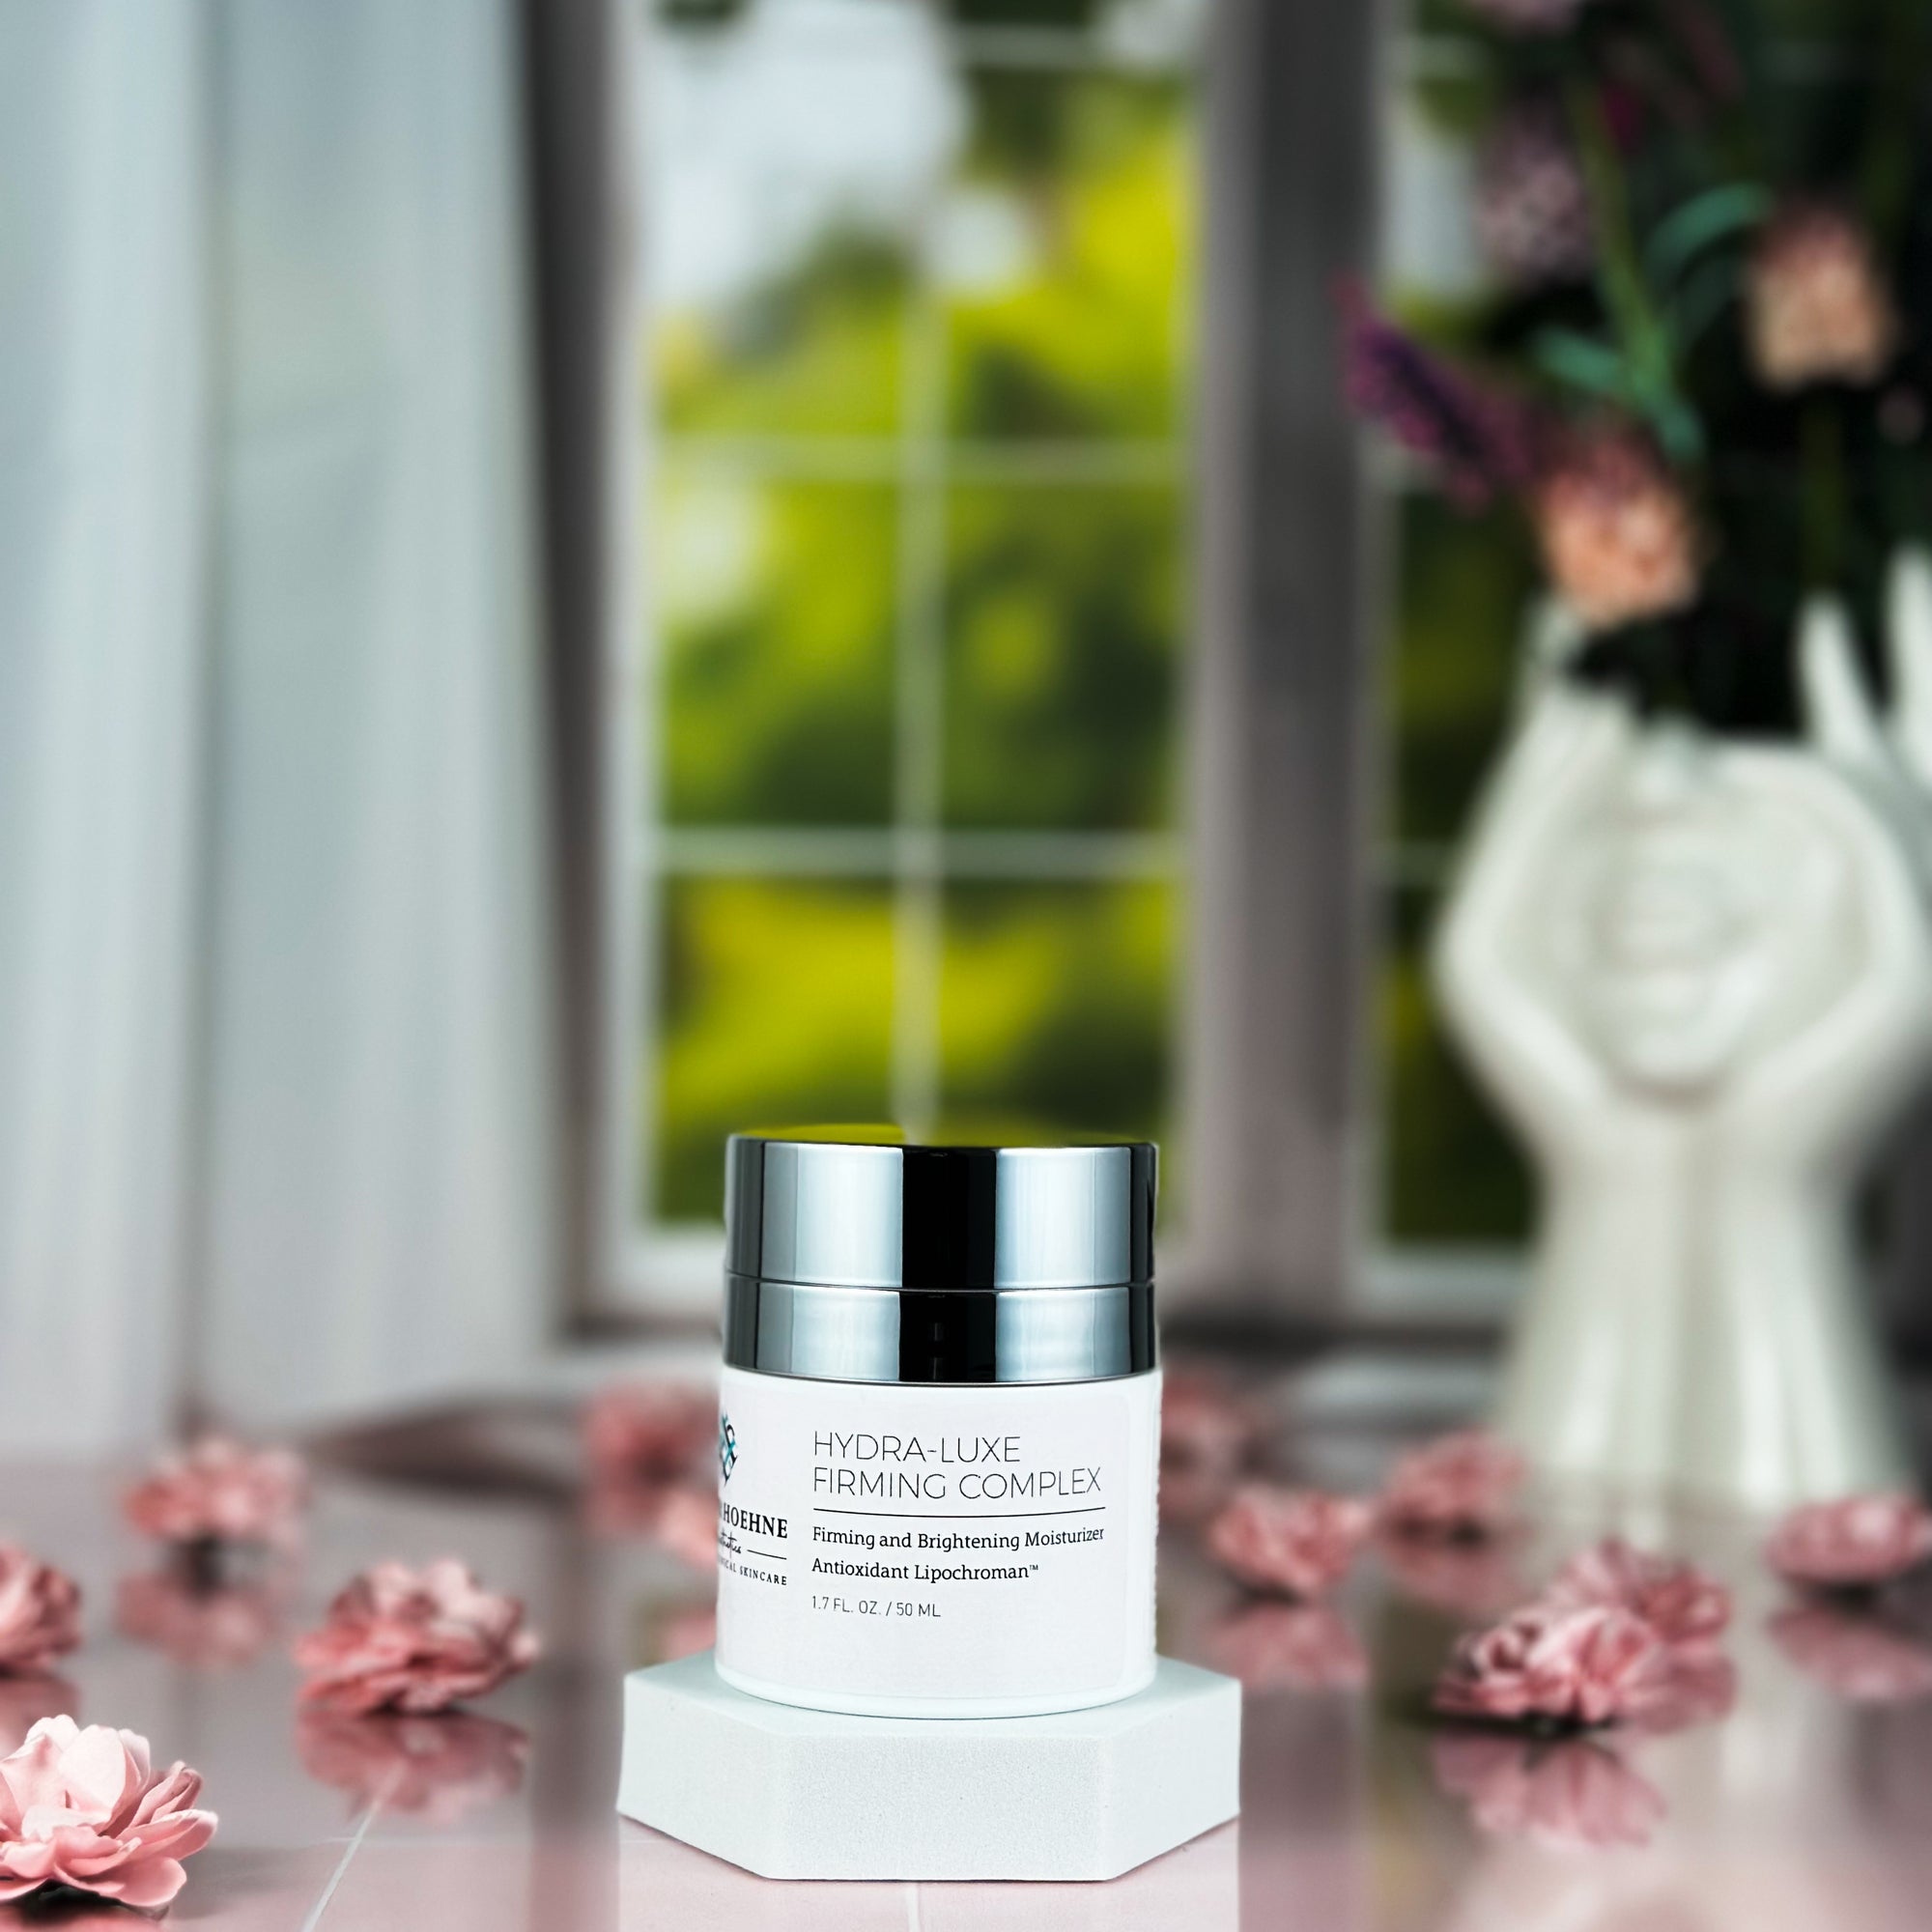 Hydra-Luxe Firming Complex